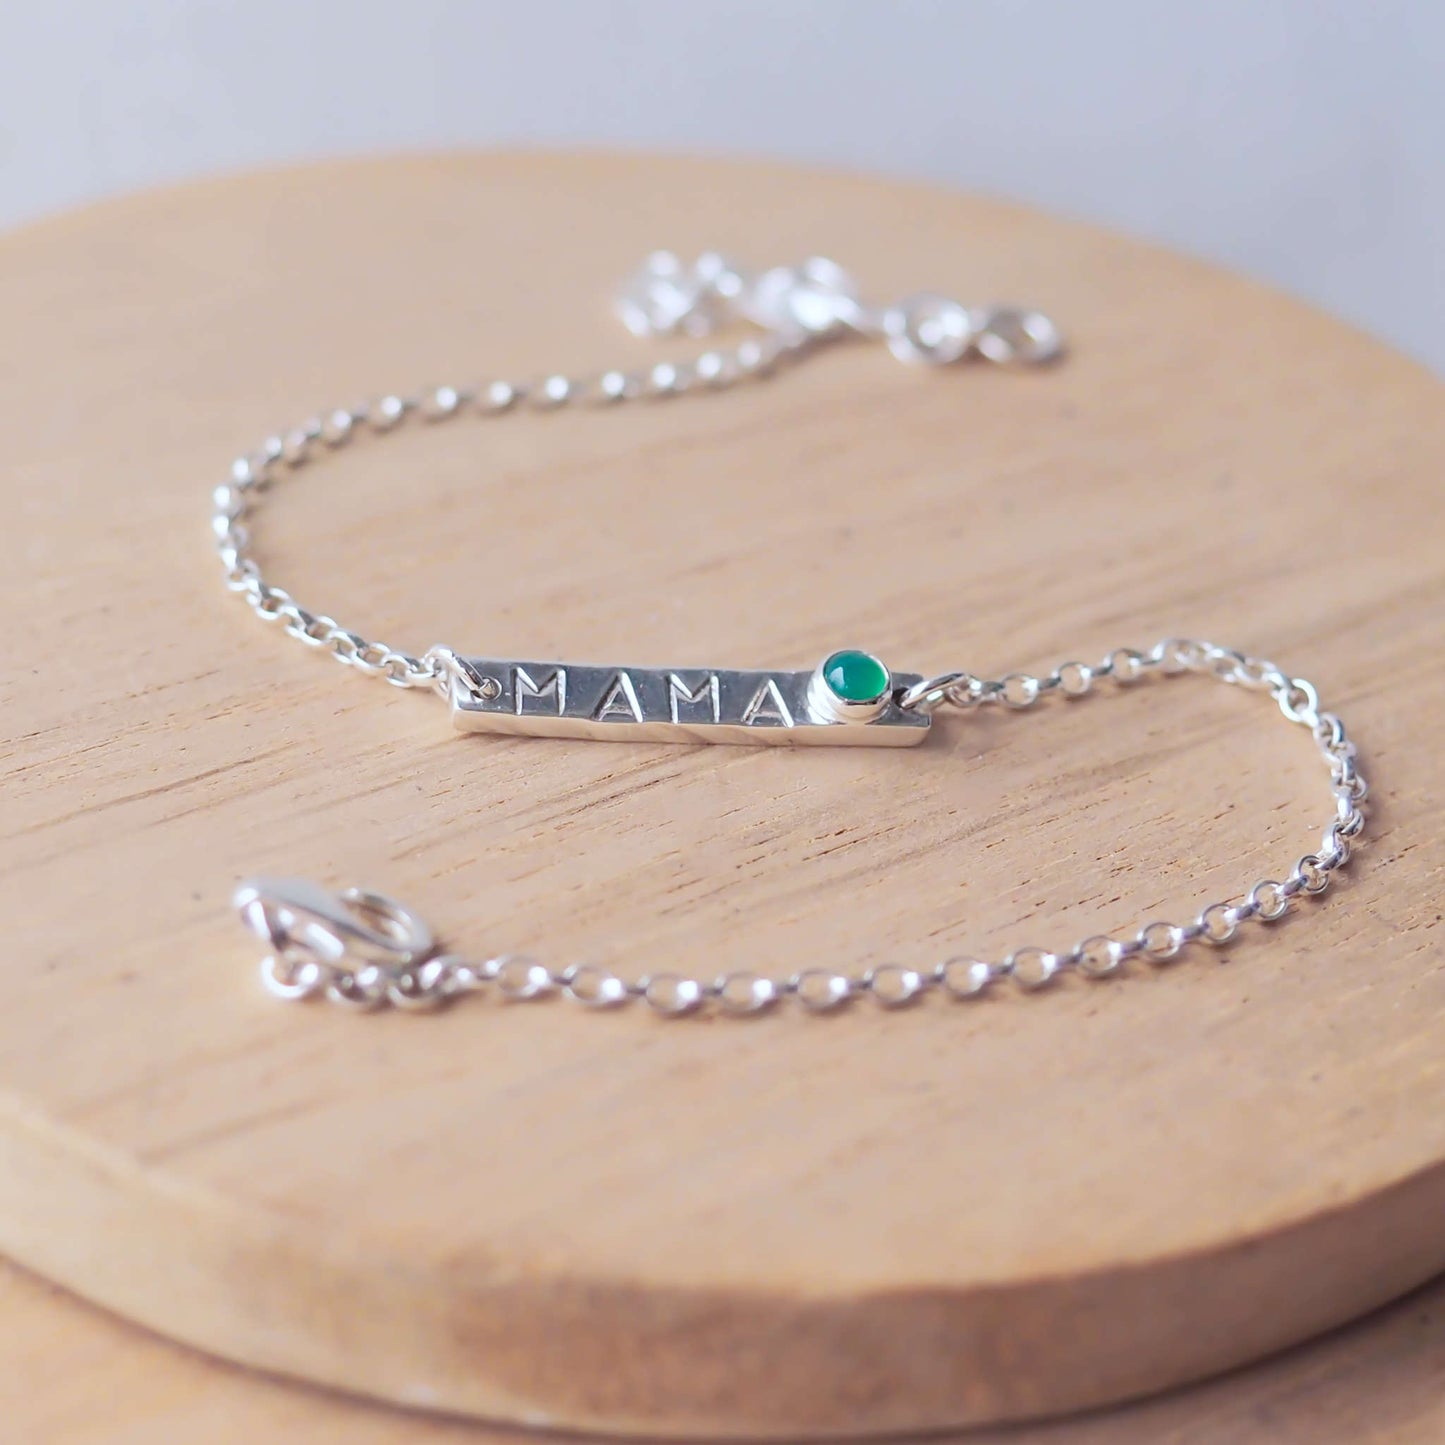 Silver Bar bracelet with hand stamped MAMA with a baby birthstone in May Green Agate. Handmade by maram jewellery in Scotland UK